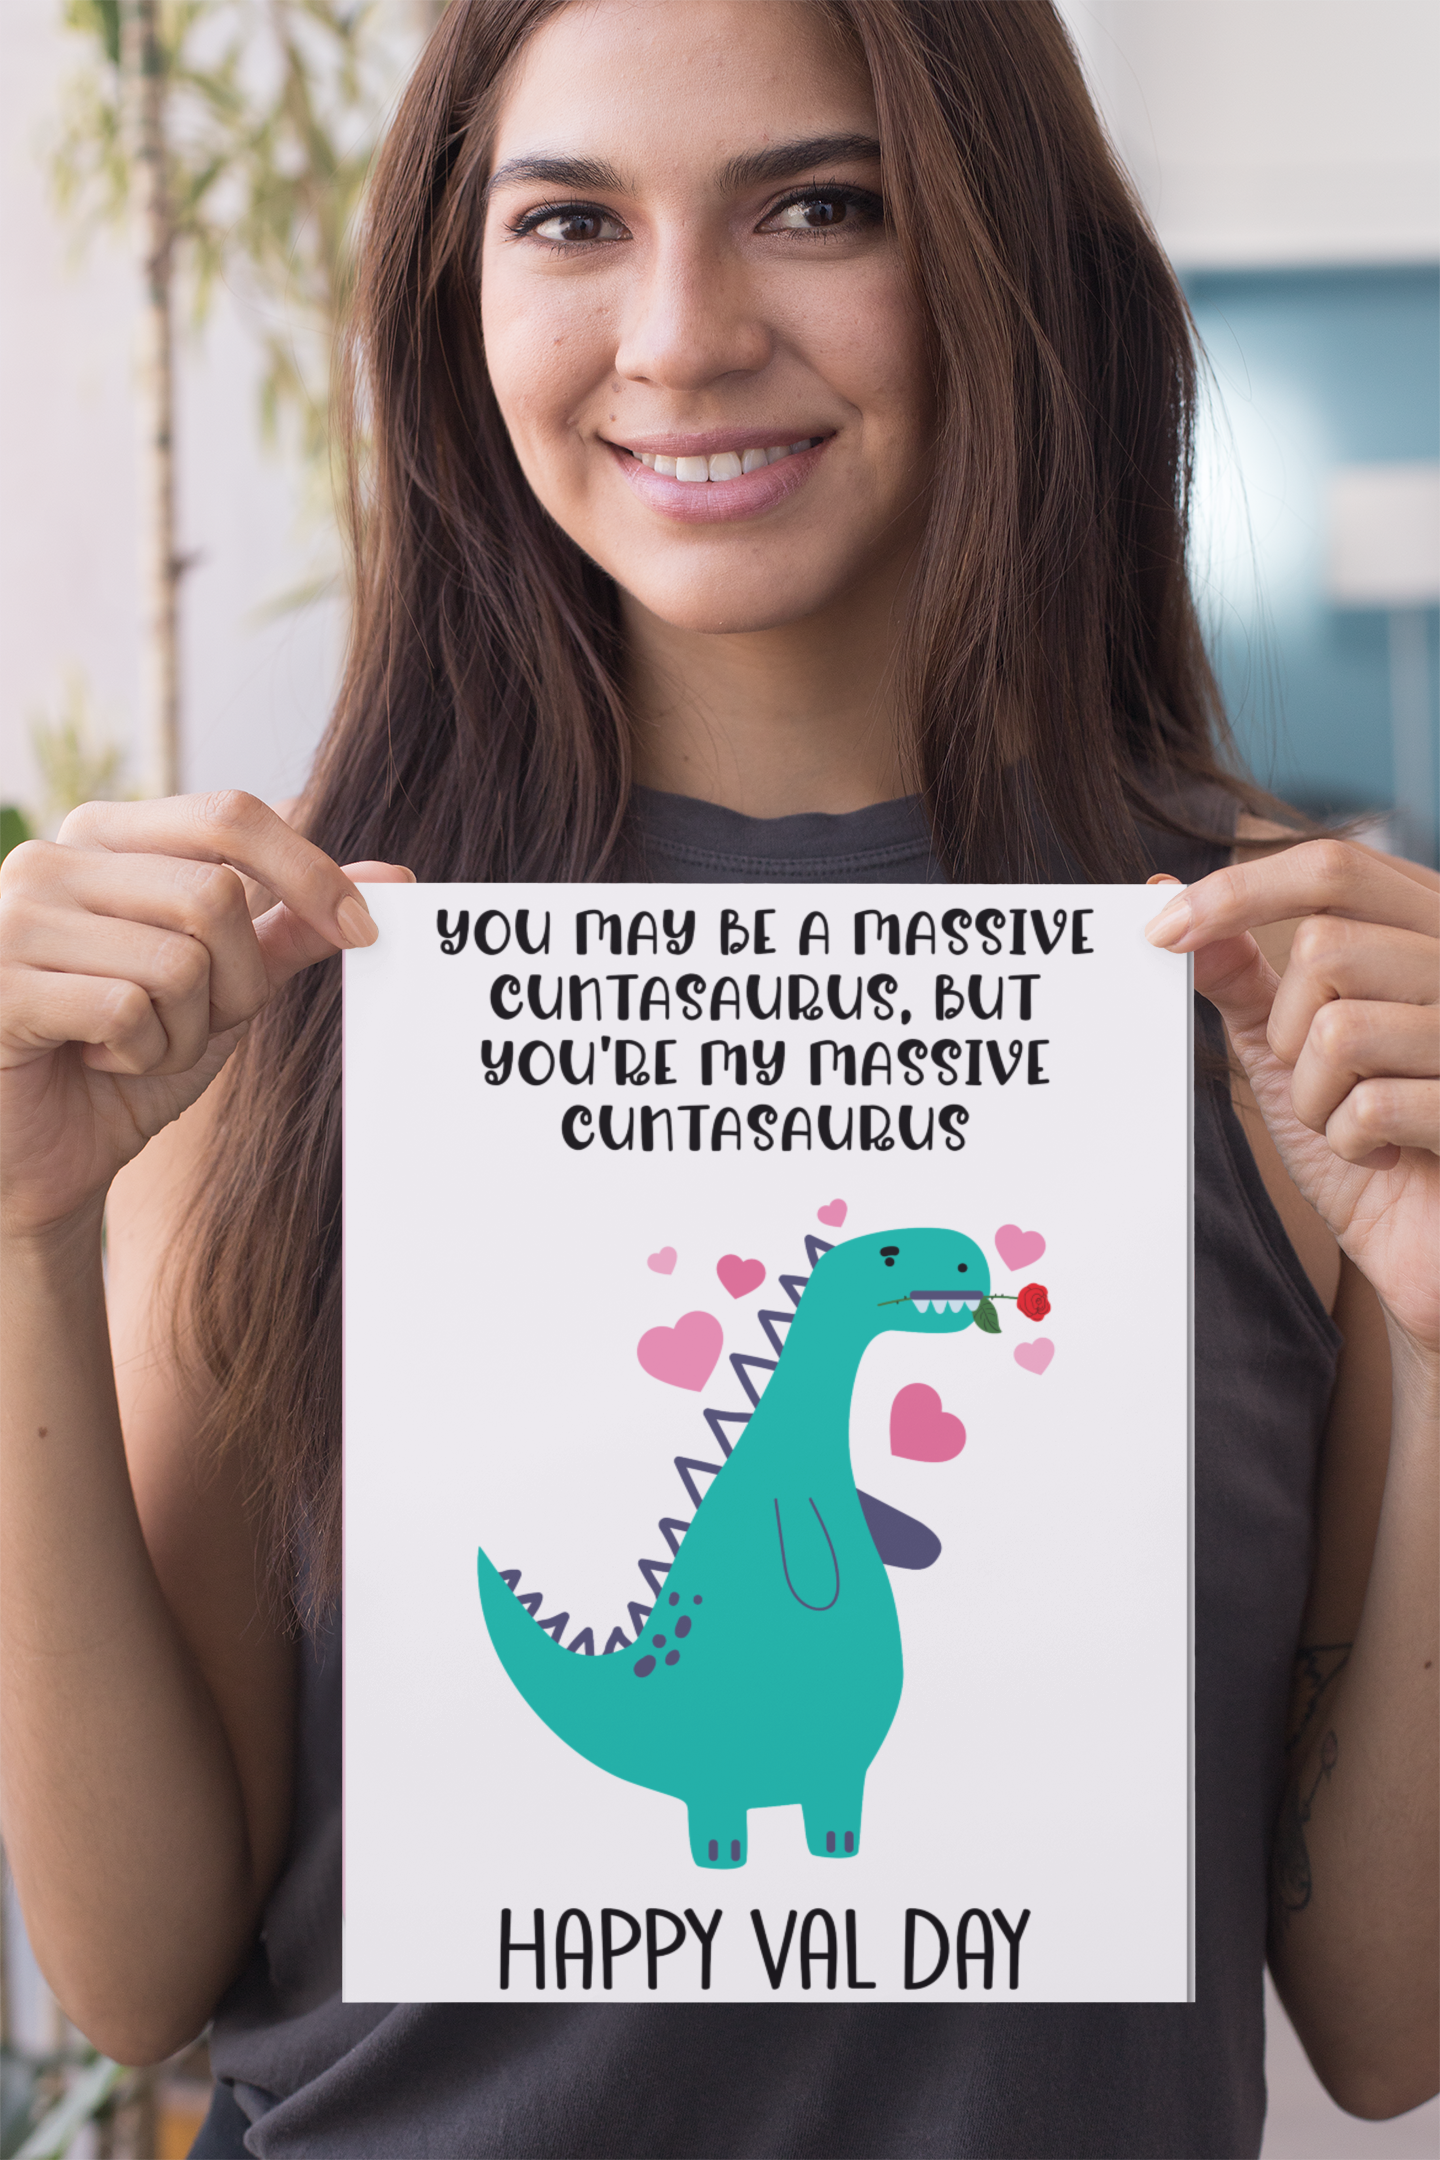 A5 glossy white card with a valentines dinosaur design to the front. The quote reads 'you may be a massive cuntasaurus, but you're my massive cuntasaurus'. With happy val day situated at the bottom. The inside is left blank.